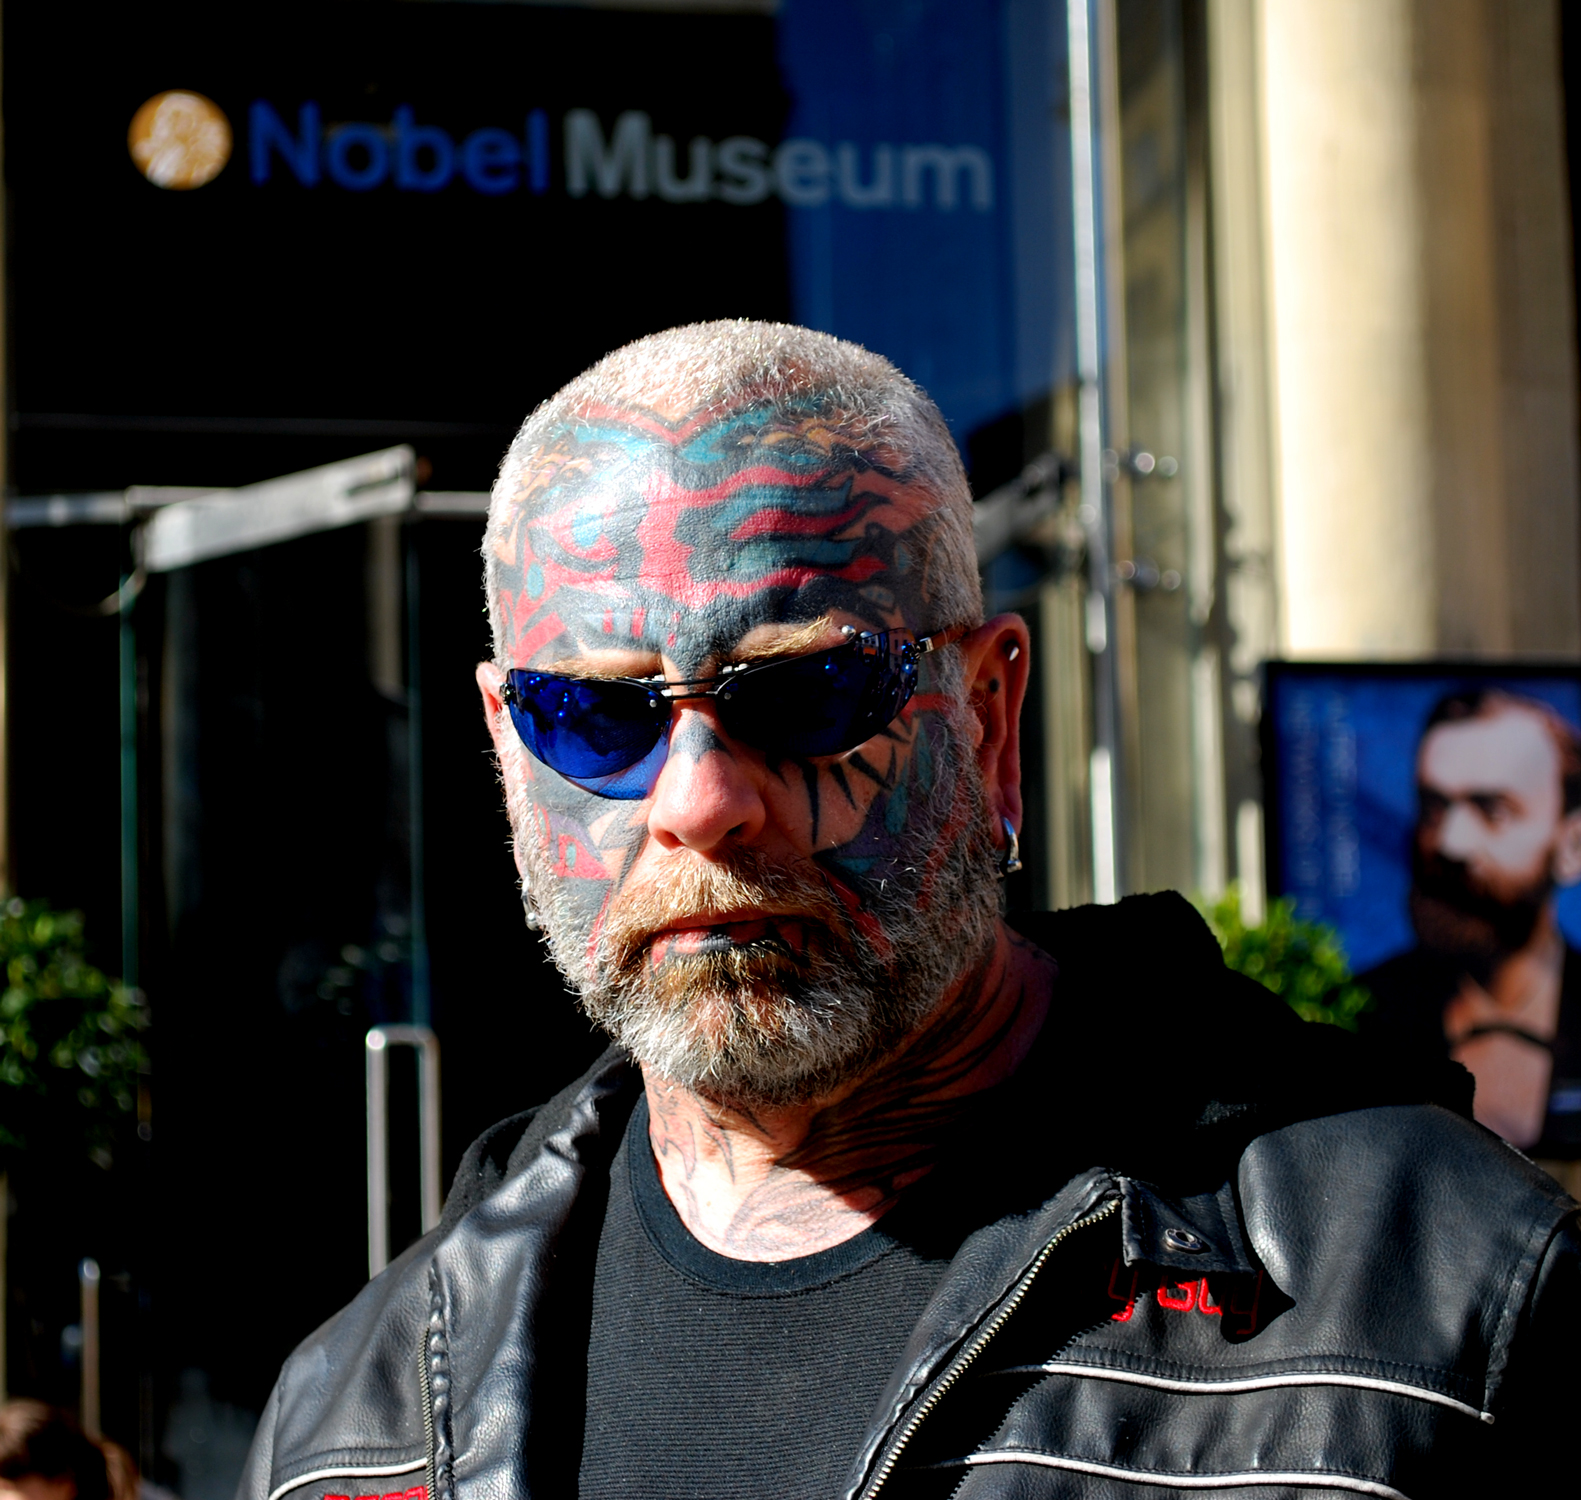 THE SCARY GUY ON TOUR IN STOCKHOLM SWEDEN IN FRONT OF THE NOBEL MUSEUM